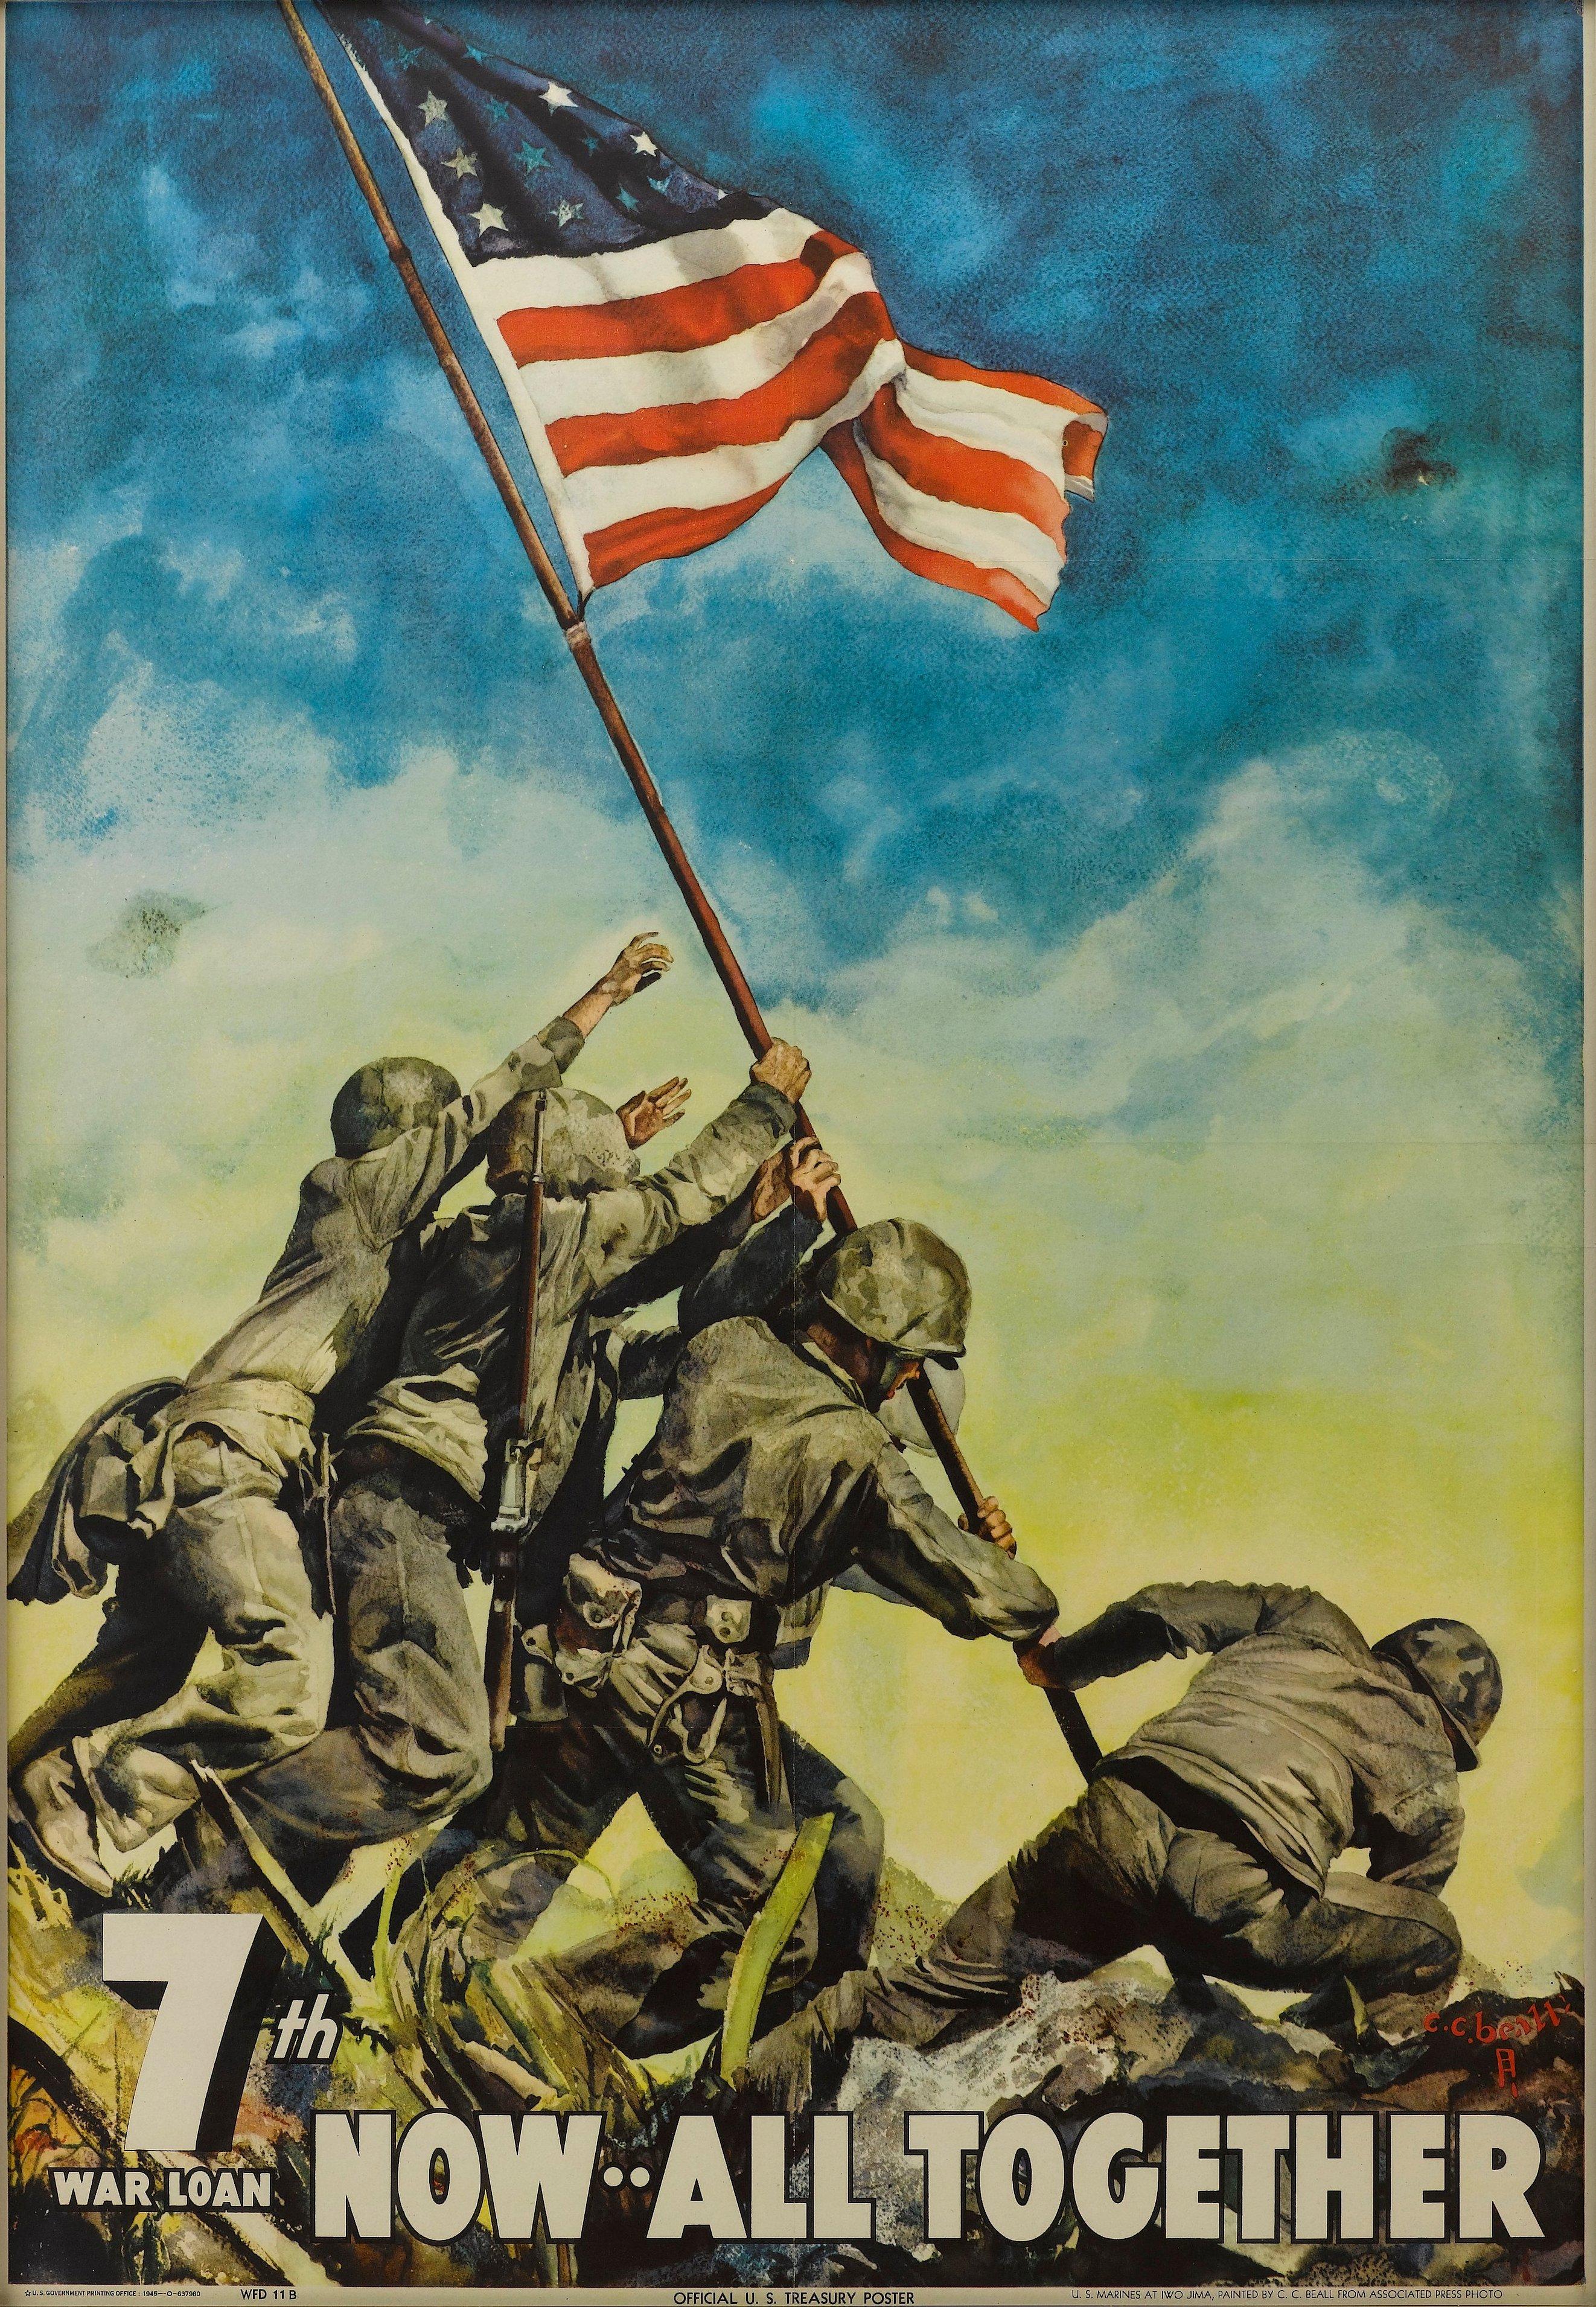 This is a vintage WWII 7th War Loan poster, illustrated by C.C. Beall, published by the U.S. Government Printing Office in 1945. 

C.C. Beall (1892-1967) was a commercial illustrator who drew comics and book covers. He based the image on this